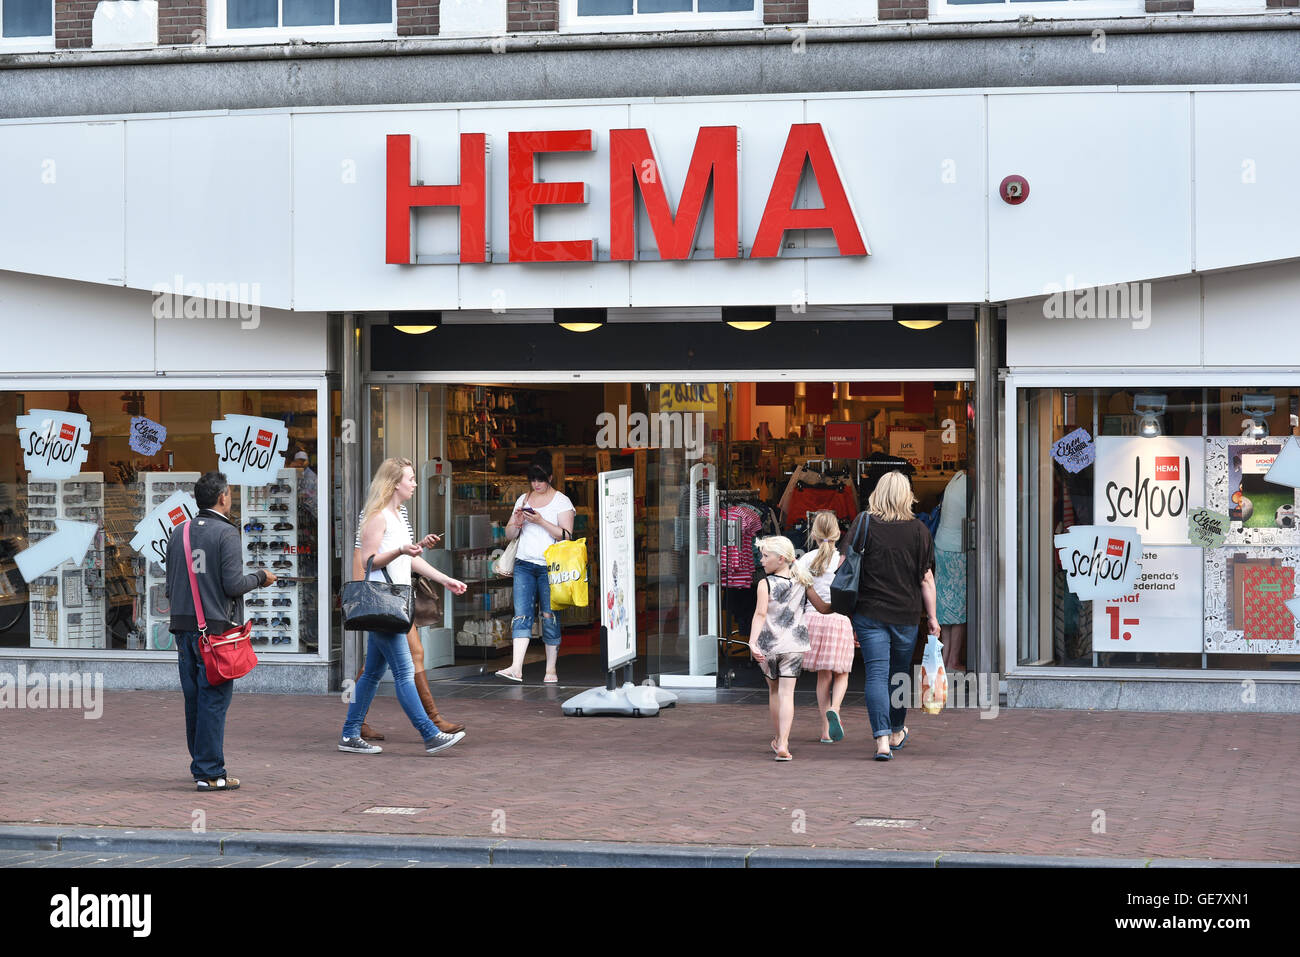 staal Gronden alliantie Hema store for Household appliances, Furnishings and fashion Stock Photo -  Alamy